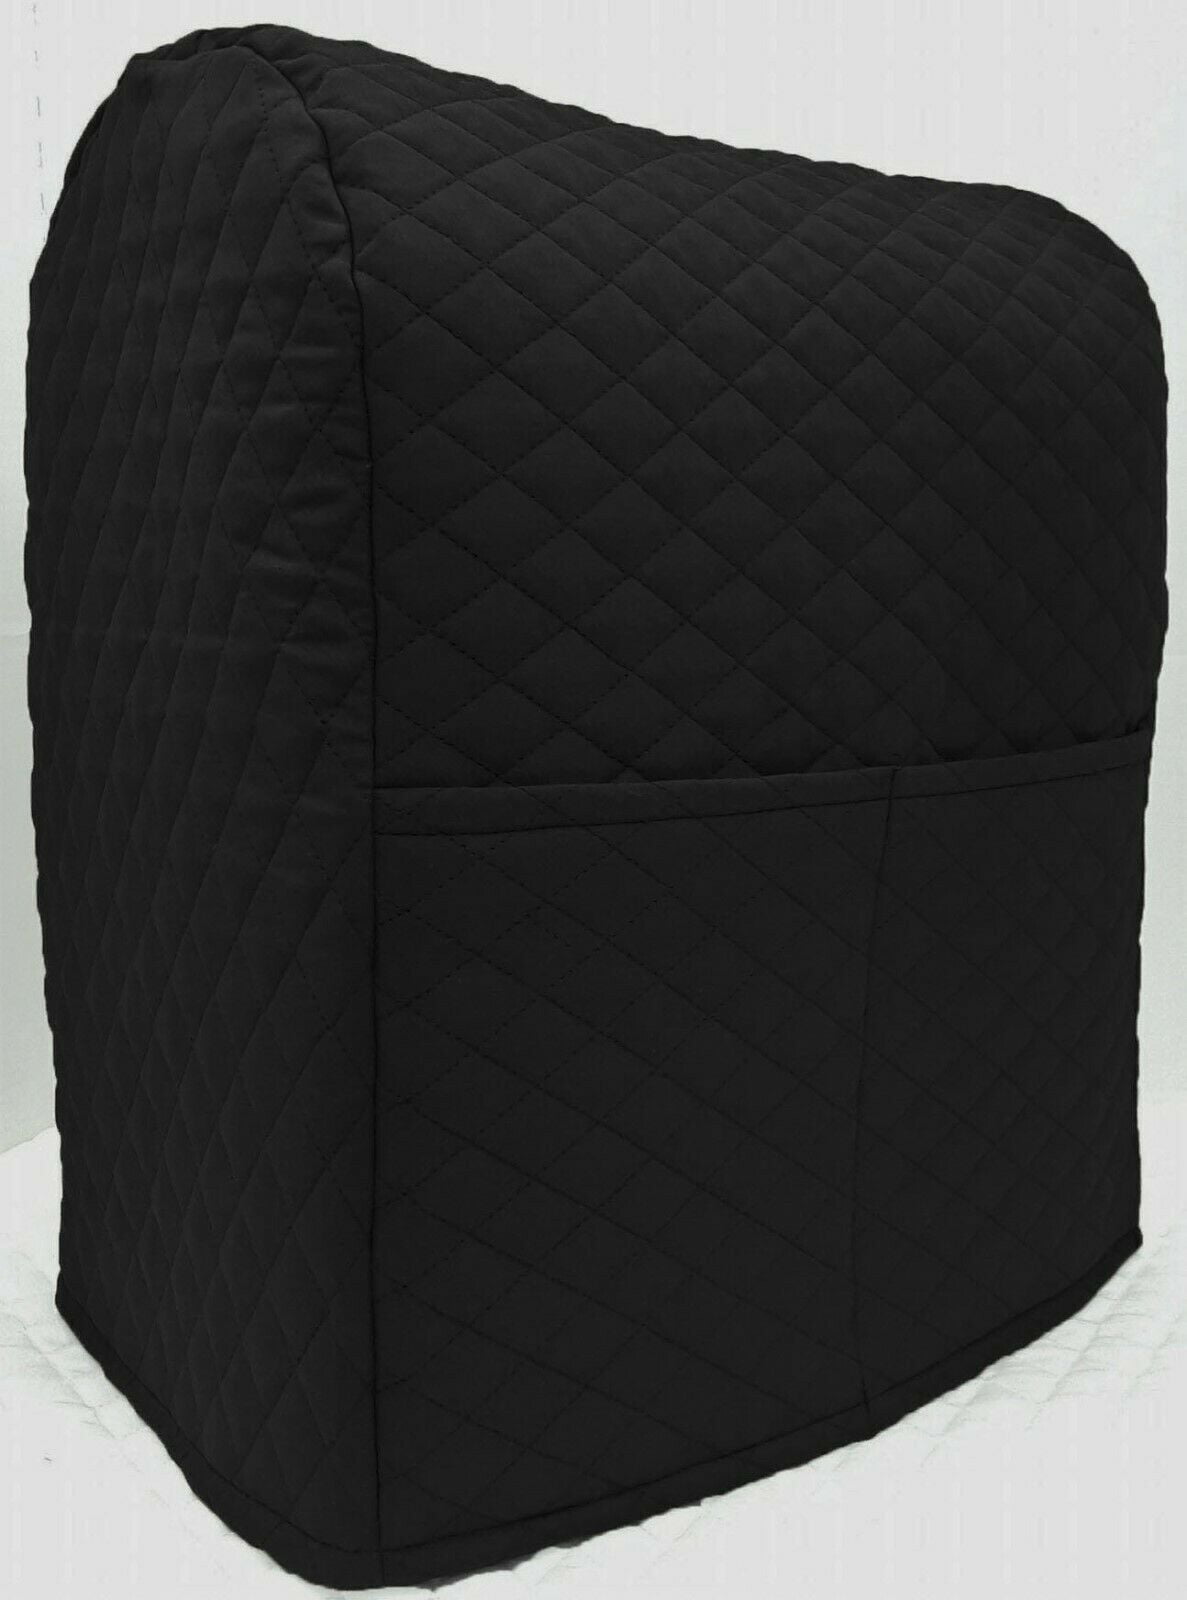 Quilted Cover Compatible with Kitchenaid Stand Mixer by Penny's Needful Things (Black, 3.5 qt Artisan Mini Tilt Head)